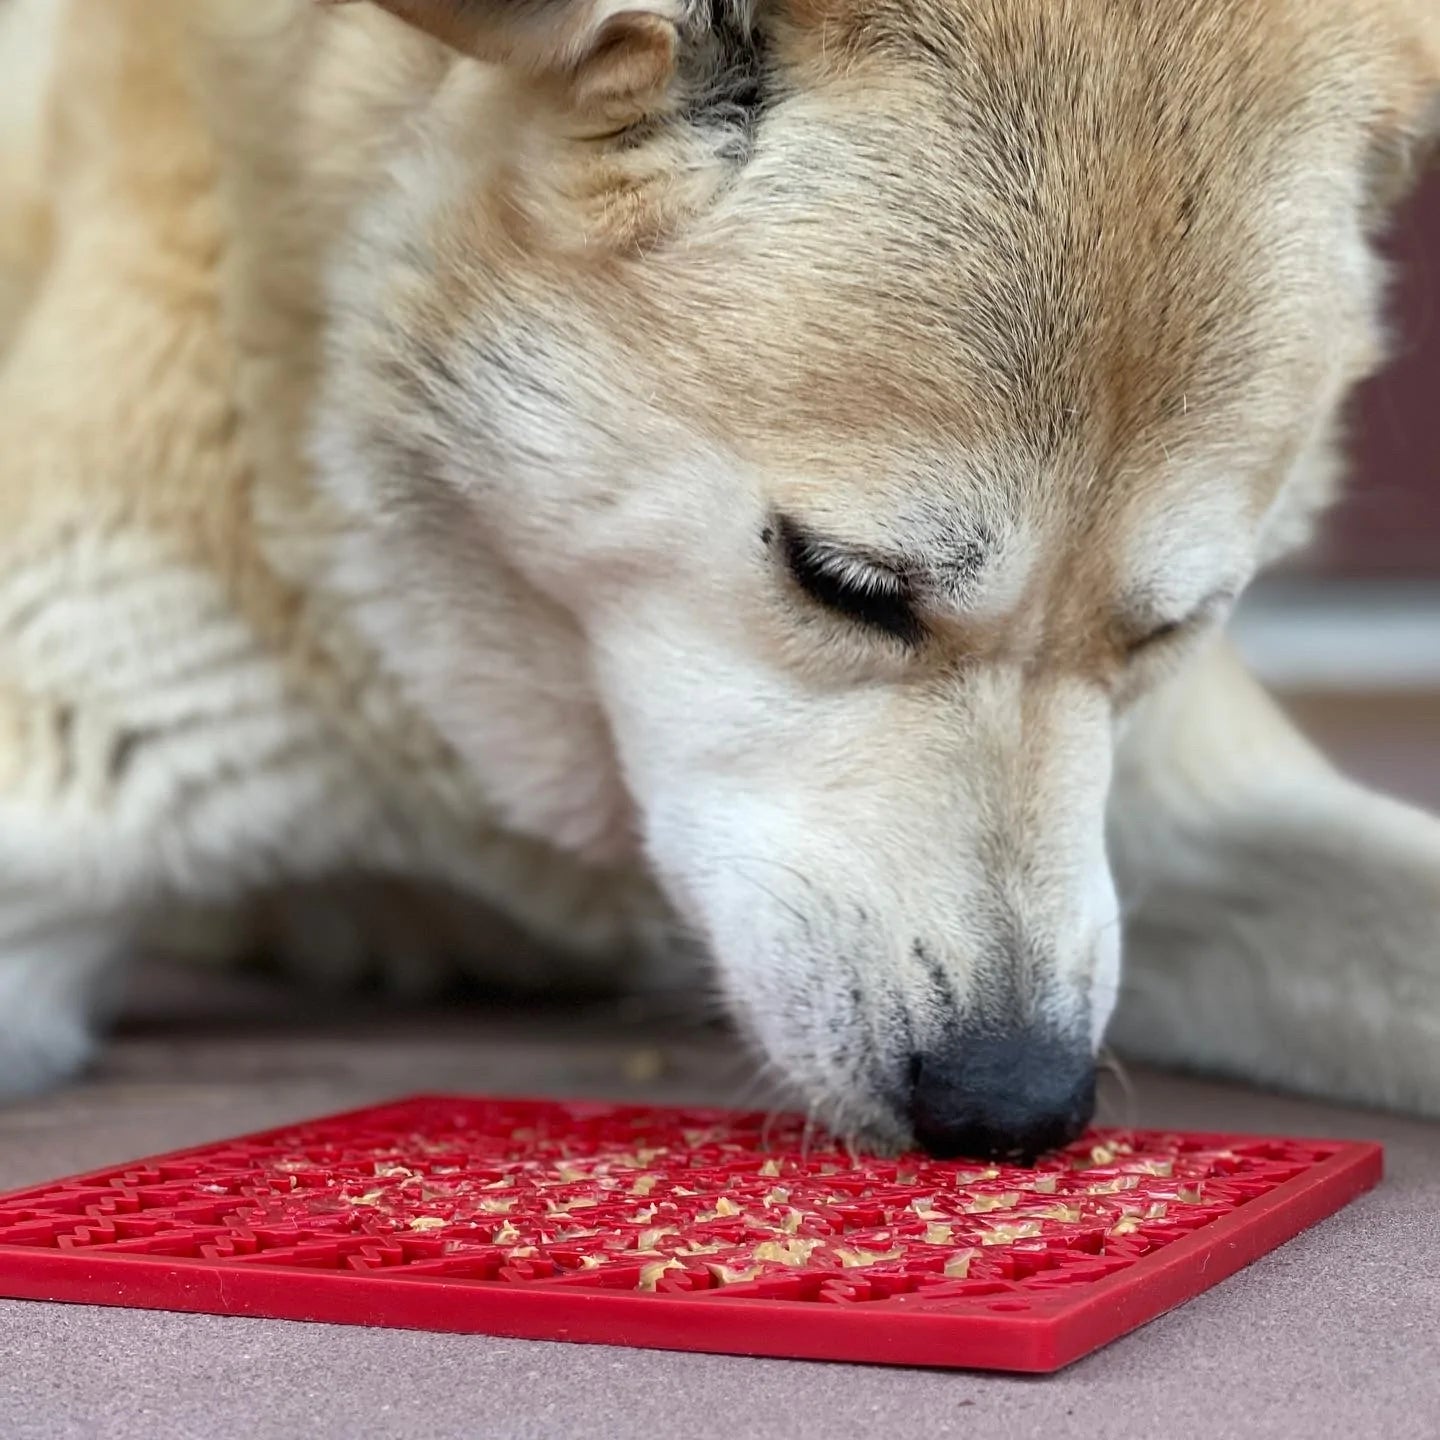 9 Frozen Lick Mat Recipes To Keep Your Dog Busy And Cool